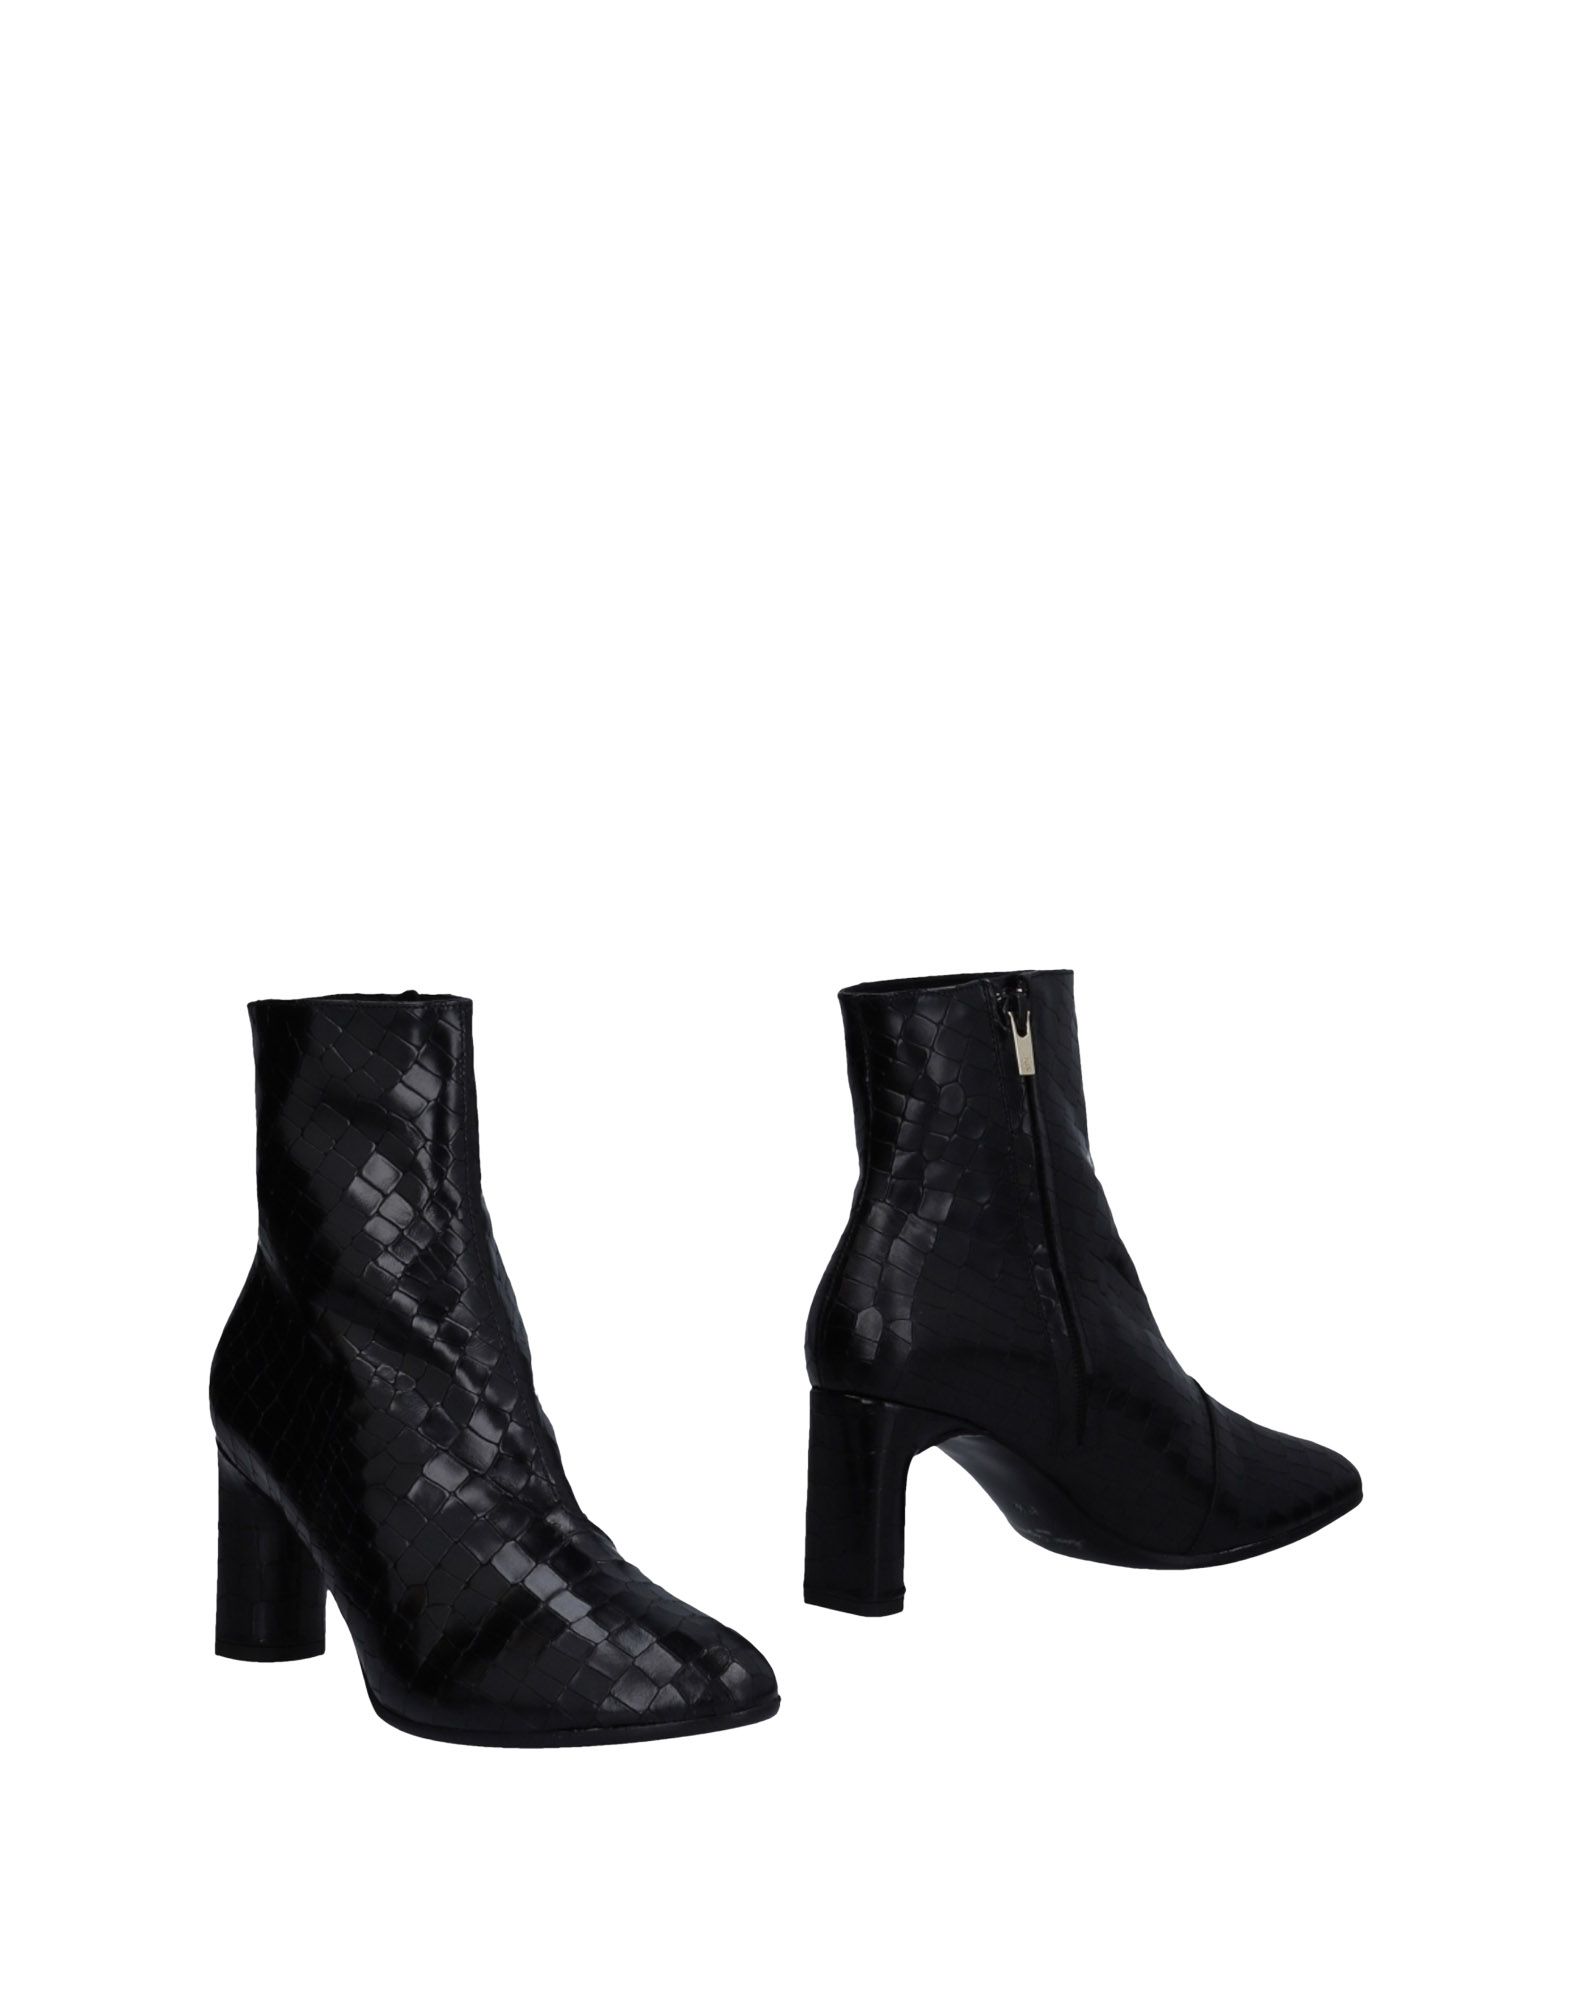 dressing gownRT CLERGERIE Ankle boot,11473548VQ 13